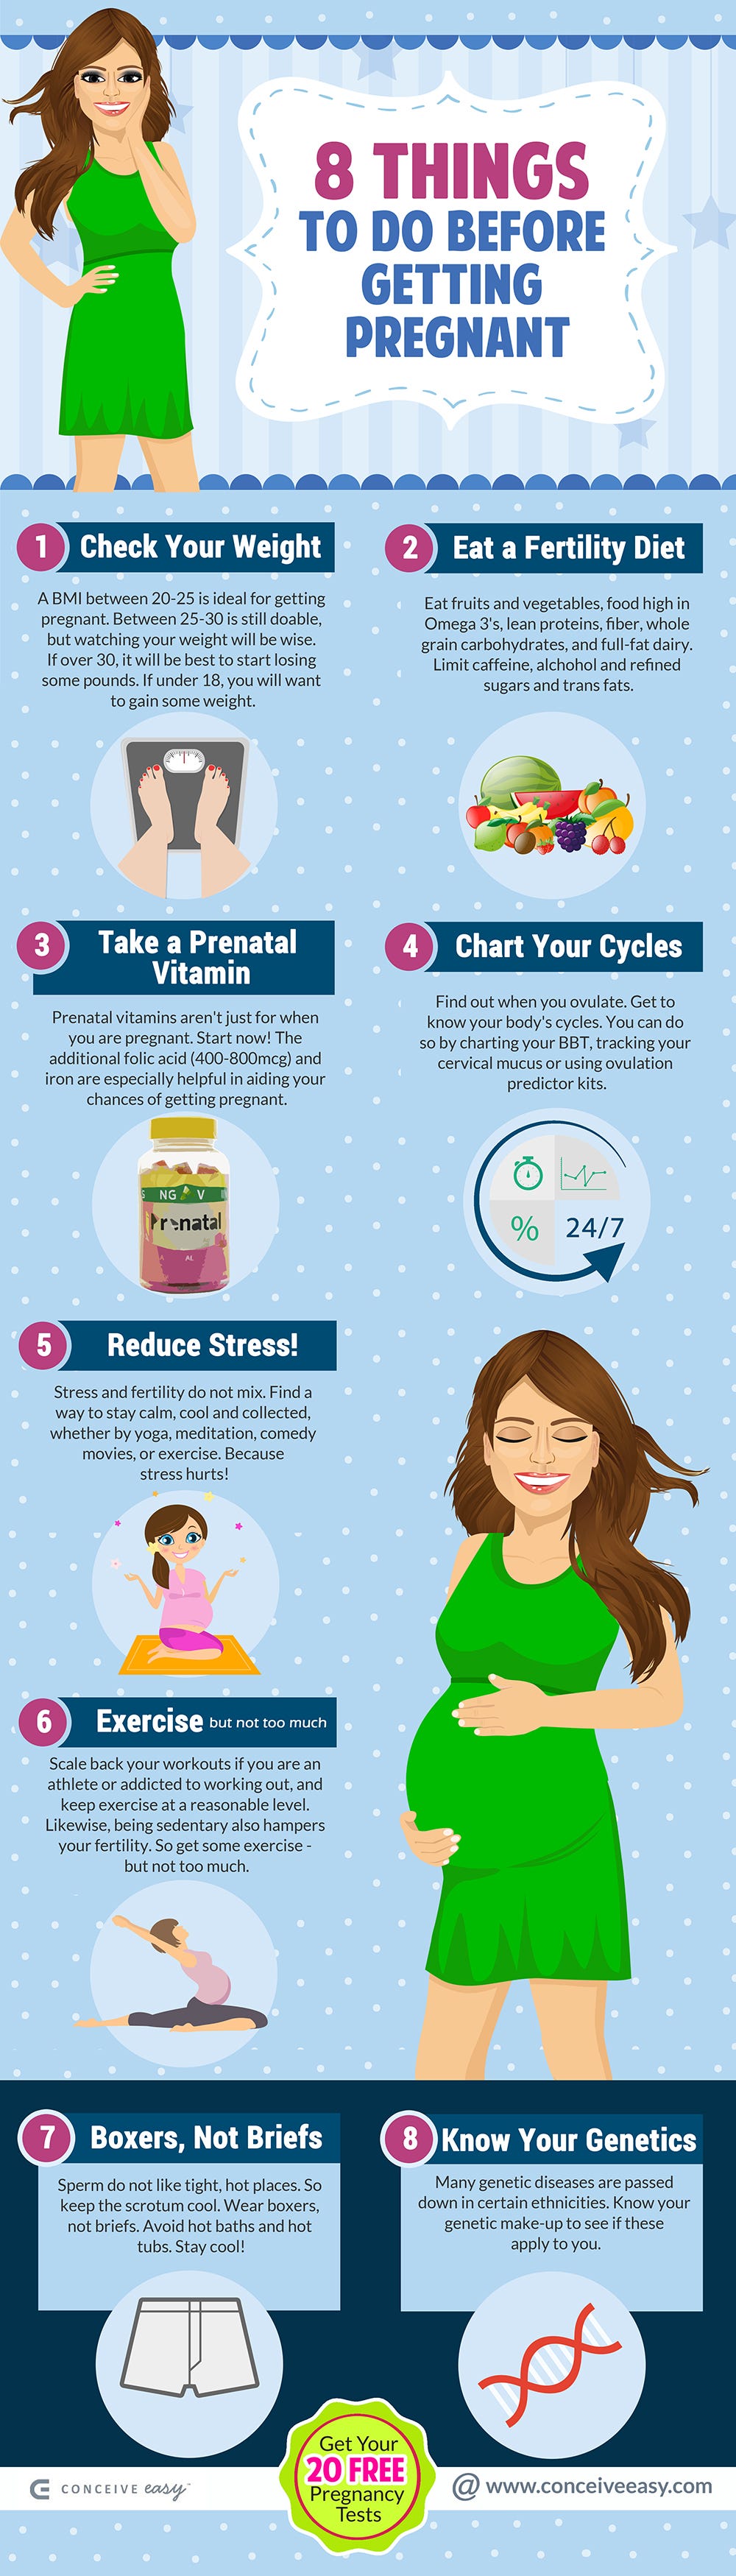 8 Things To Do Before Getting Pregnant Infographic By Conceive Easy Medium